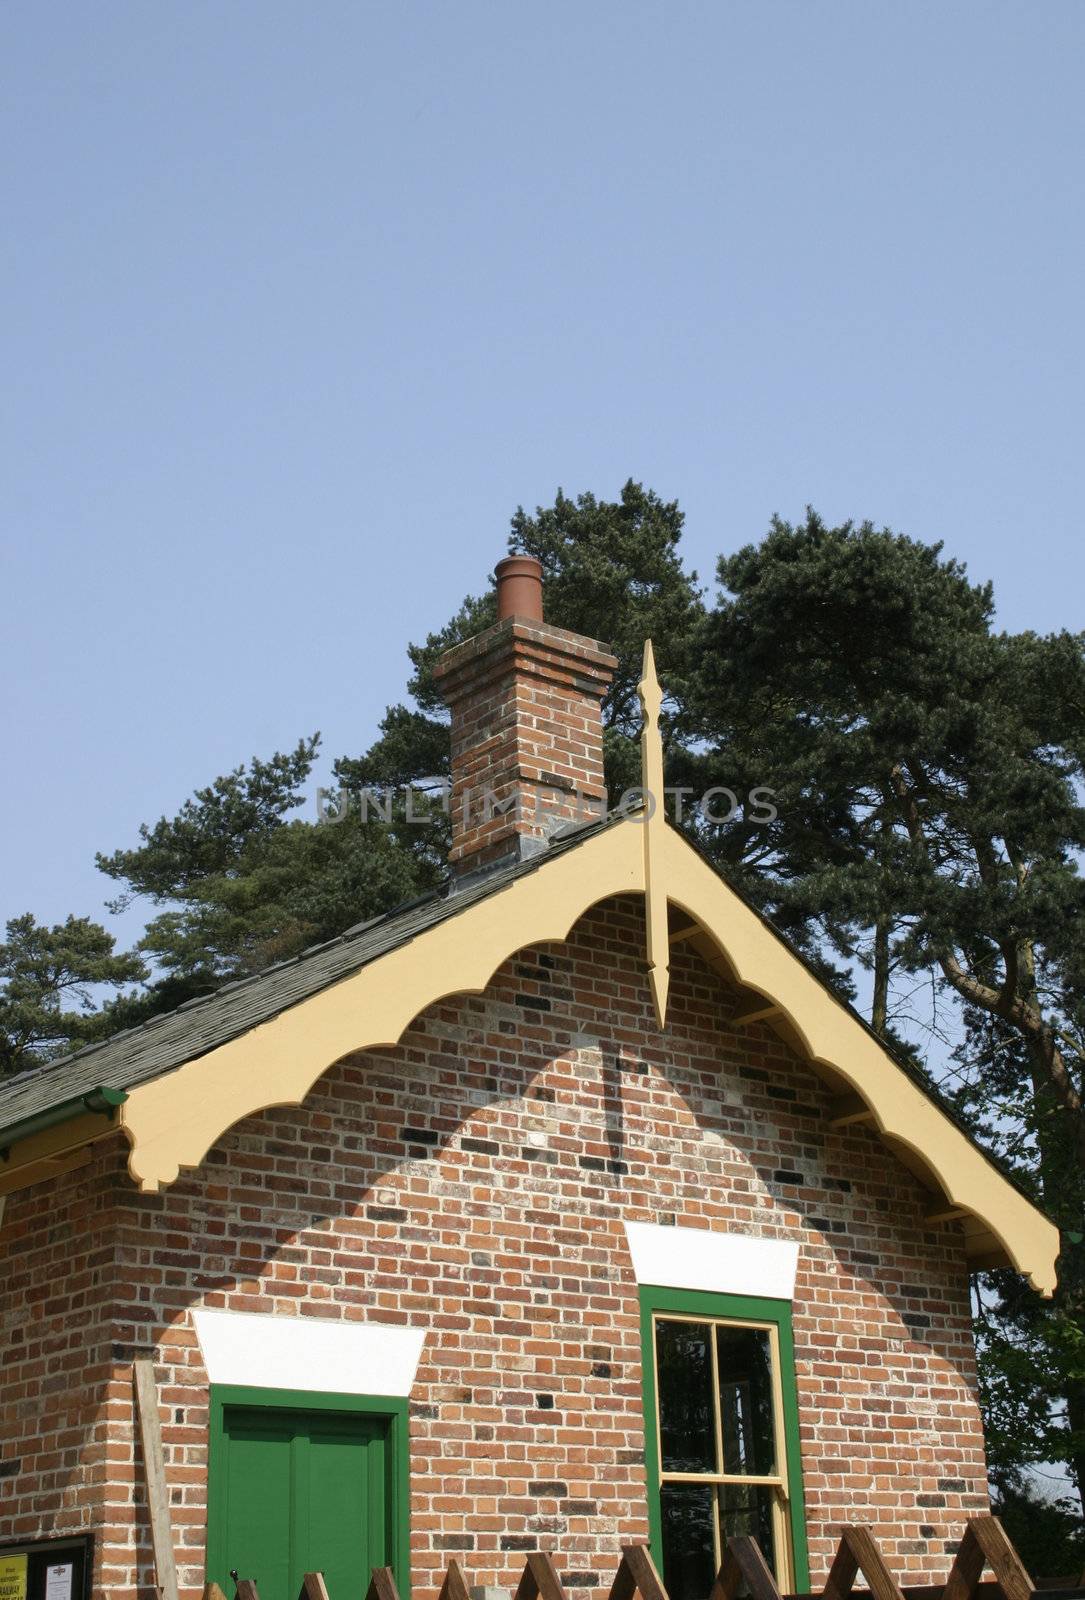 shaped wooden edging of the end of a roof gable